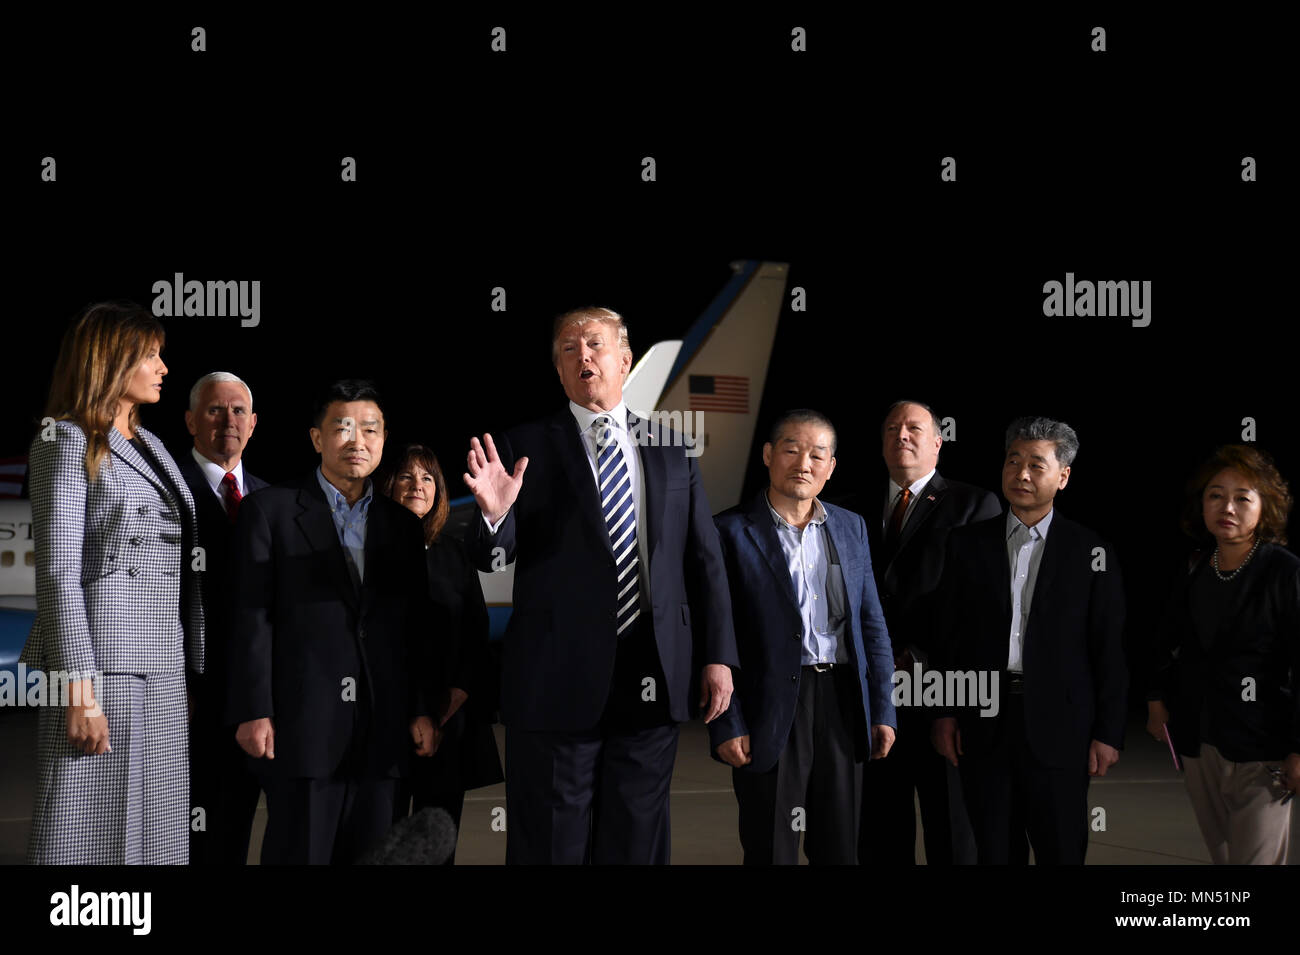 President of the United States Donald J. Trump speaks to the press at Joint Base Andrews, Md., May 10, 2018 upon the return of three Americans who were freed from North Korean prison on May 9, 2018. Kim Dong-chul, Tony Kim and Kim Hak-song arrived at JBA on board an 89th Airlift Wing C-40 high-priority personnel transport aircraft at 3 a.m. EST. President Trump, First Lady Melania Trump and senior military officials greeted the men as they arrived home. (U.S. Air Force photo/Staff Sgt. Kenny Holston) Stock Photo